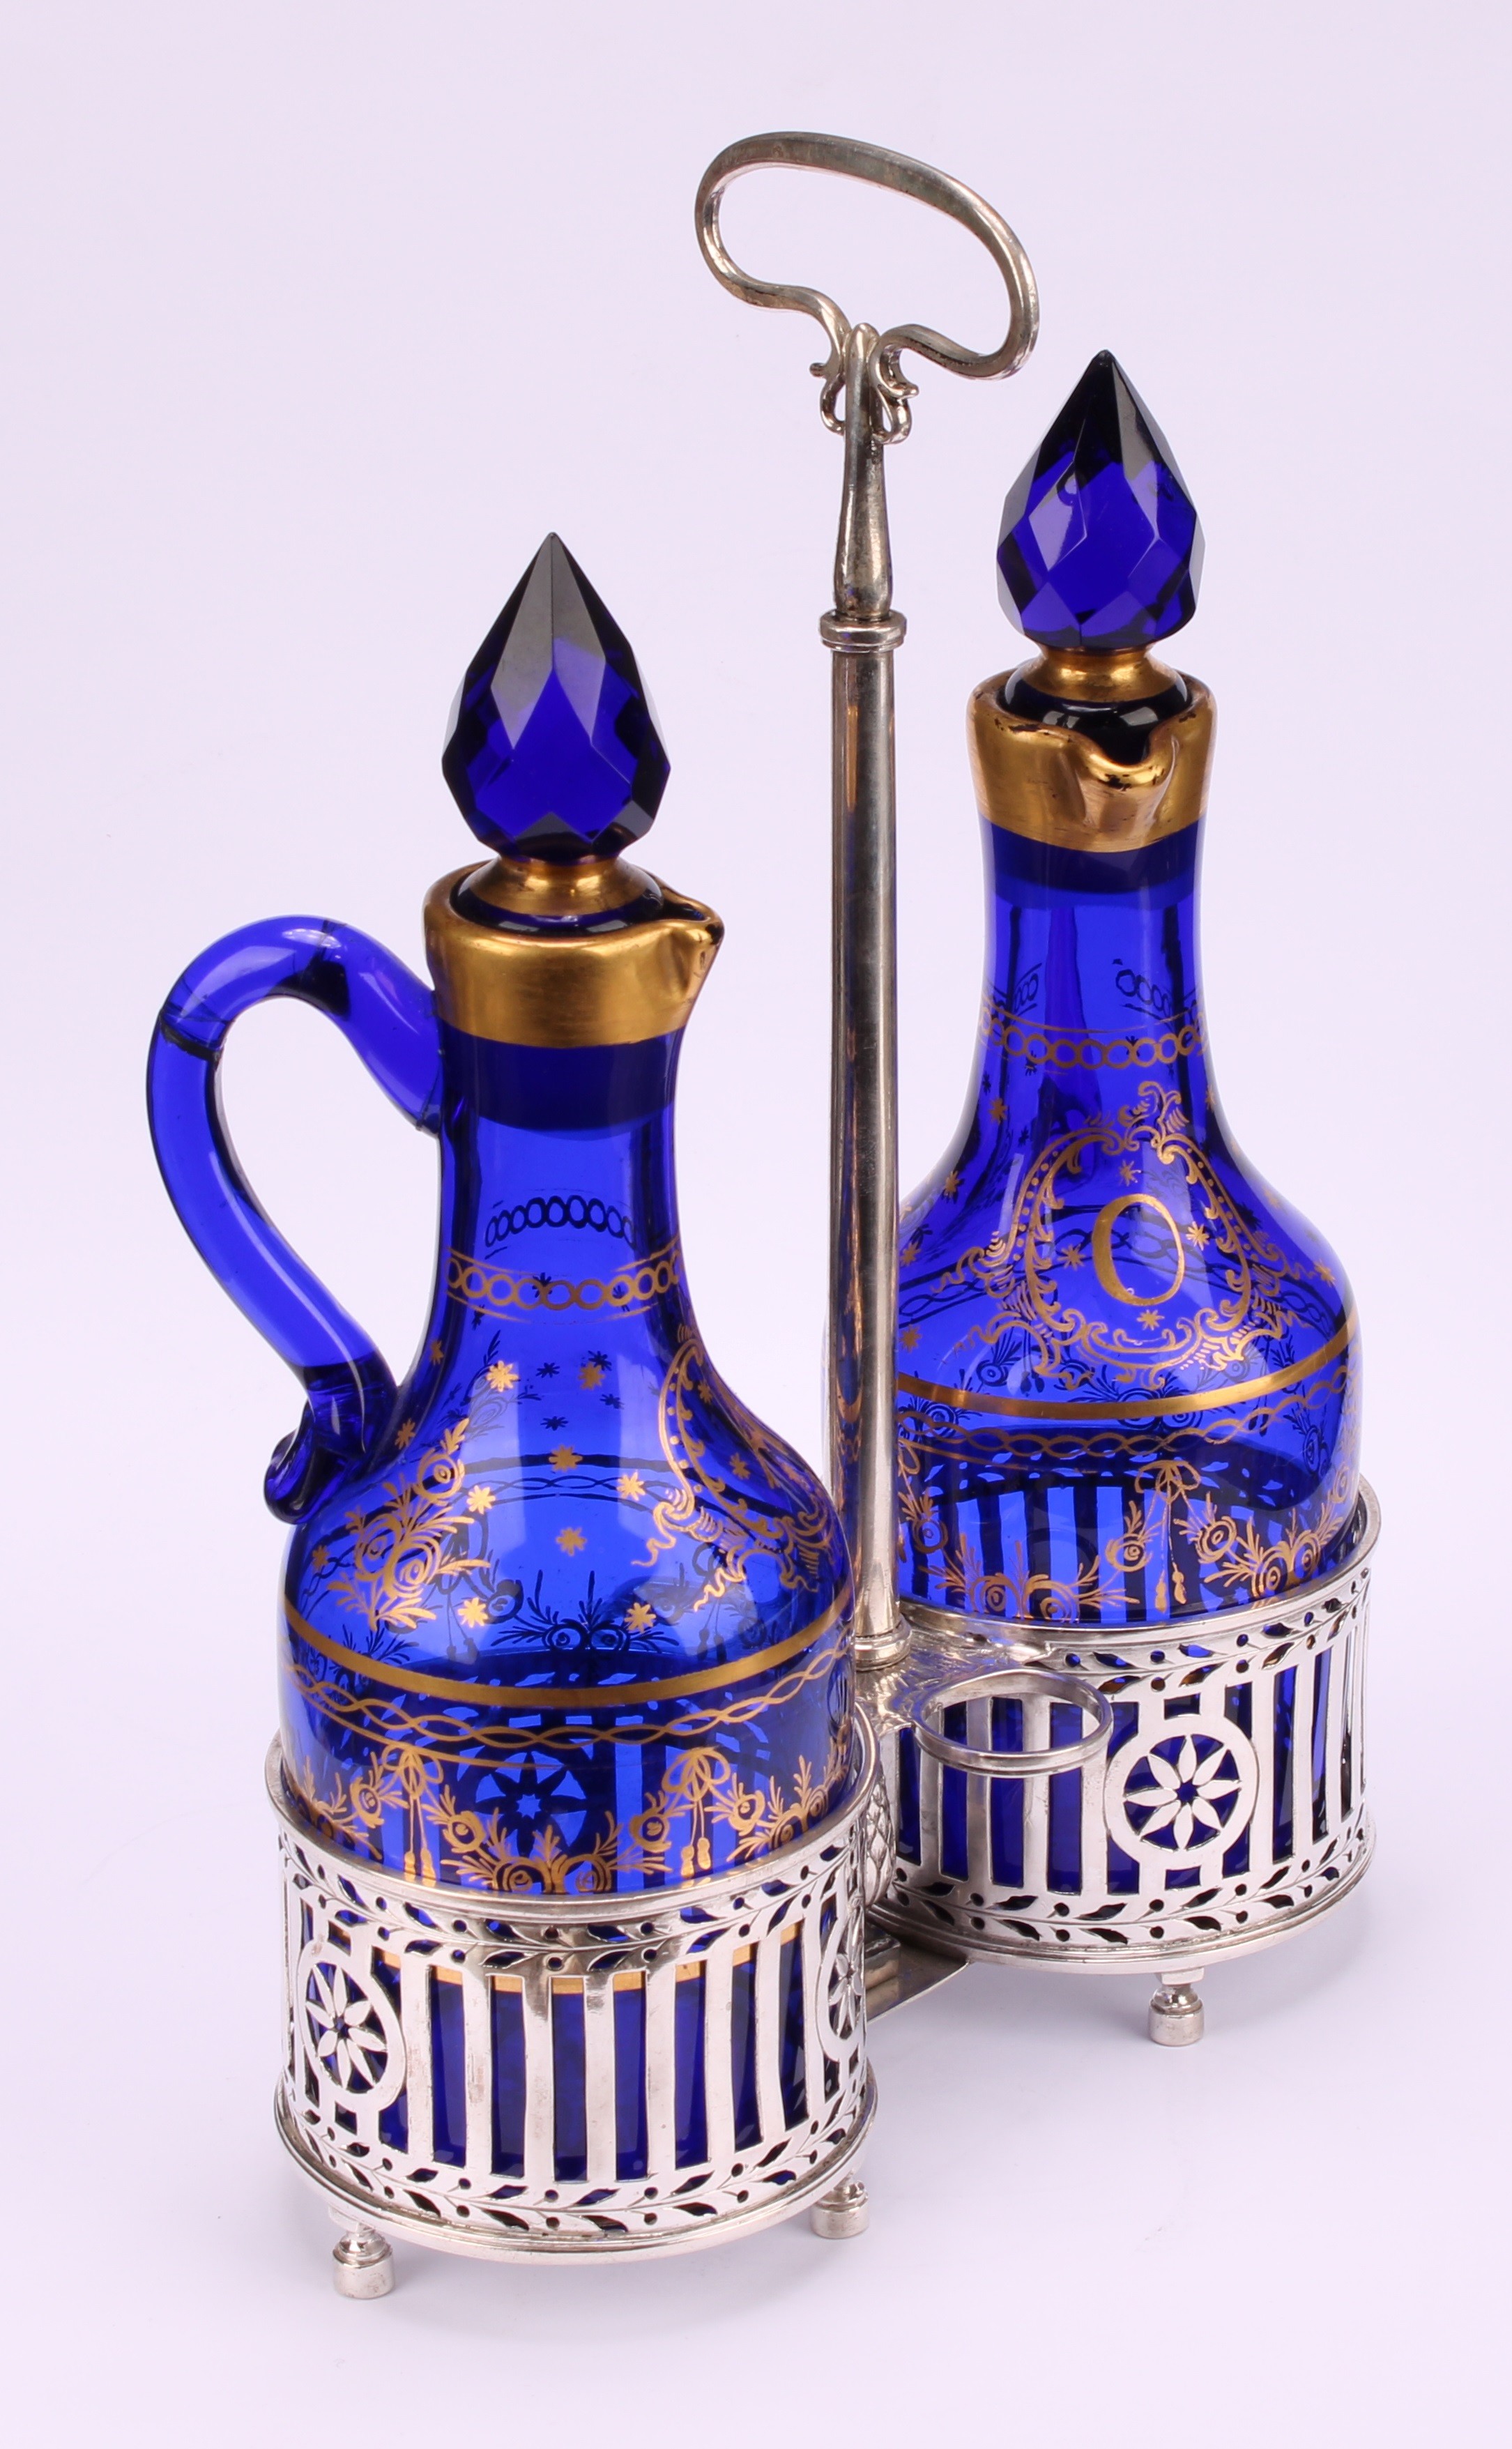 A 19th century Belgian silver two-bottle oil and vinegar cruet, gilded blue glass decanters and - Image 3 of 4